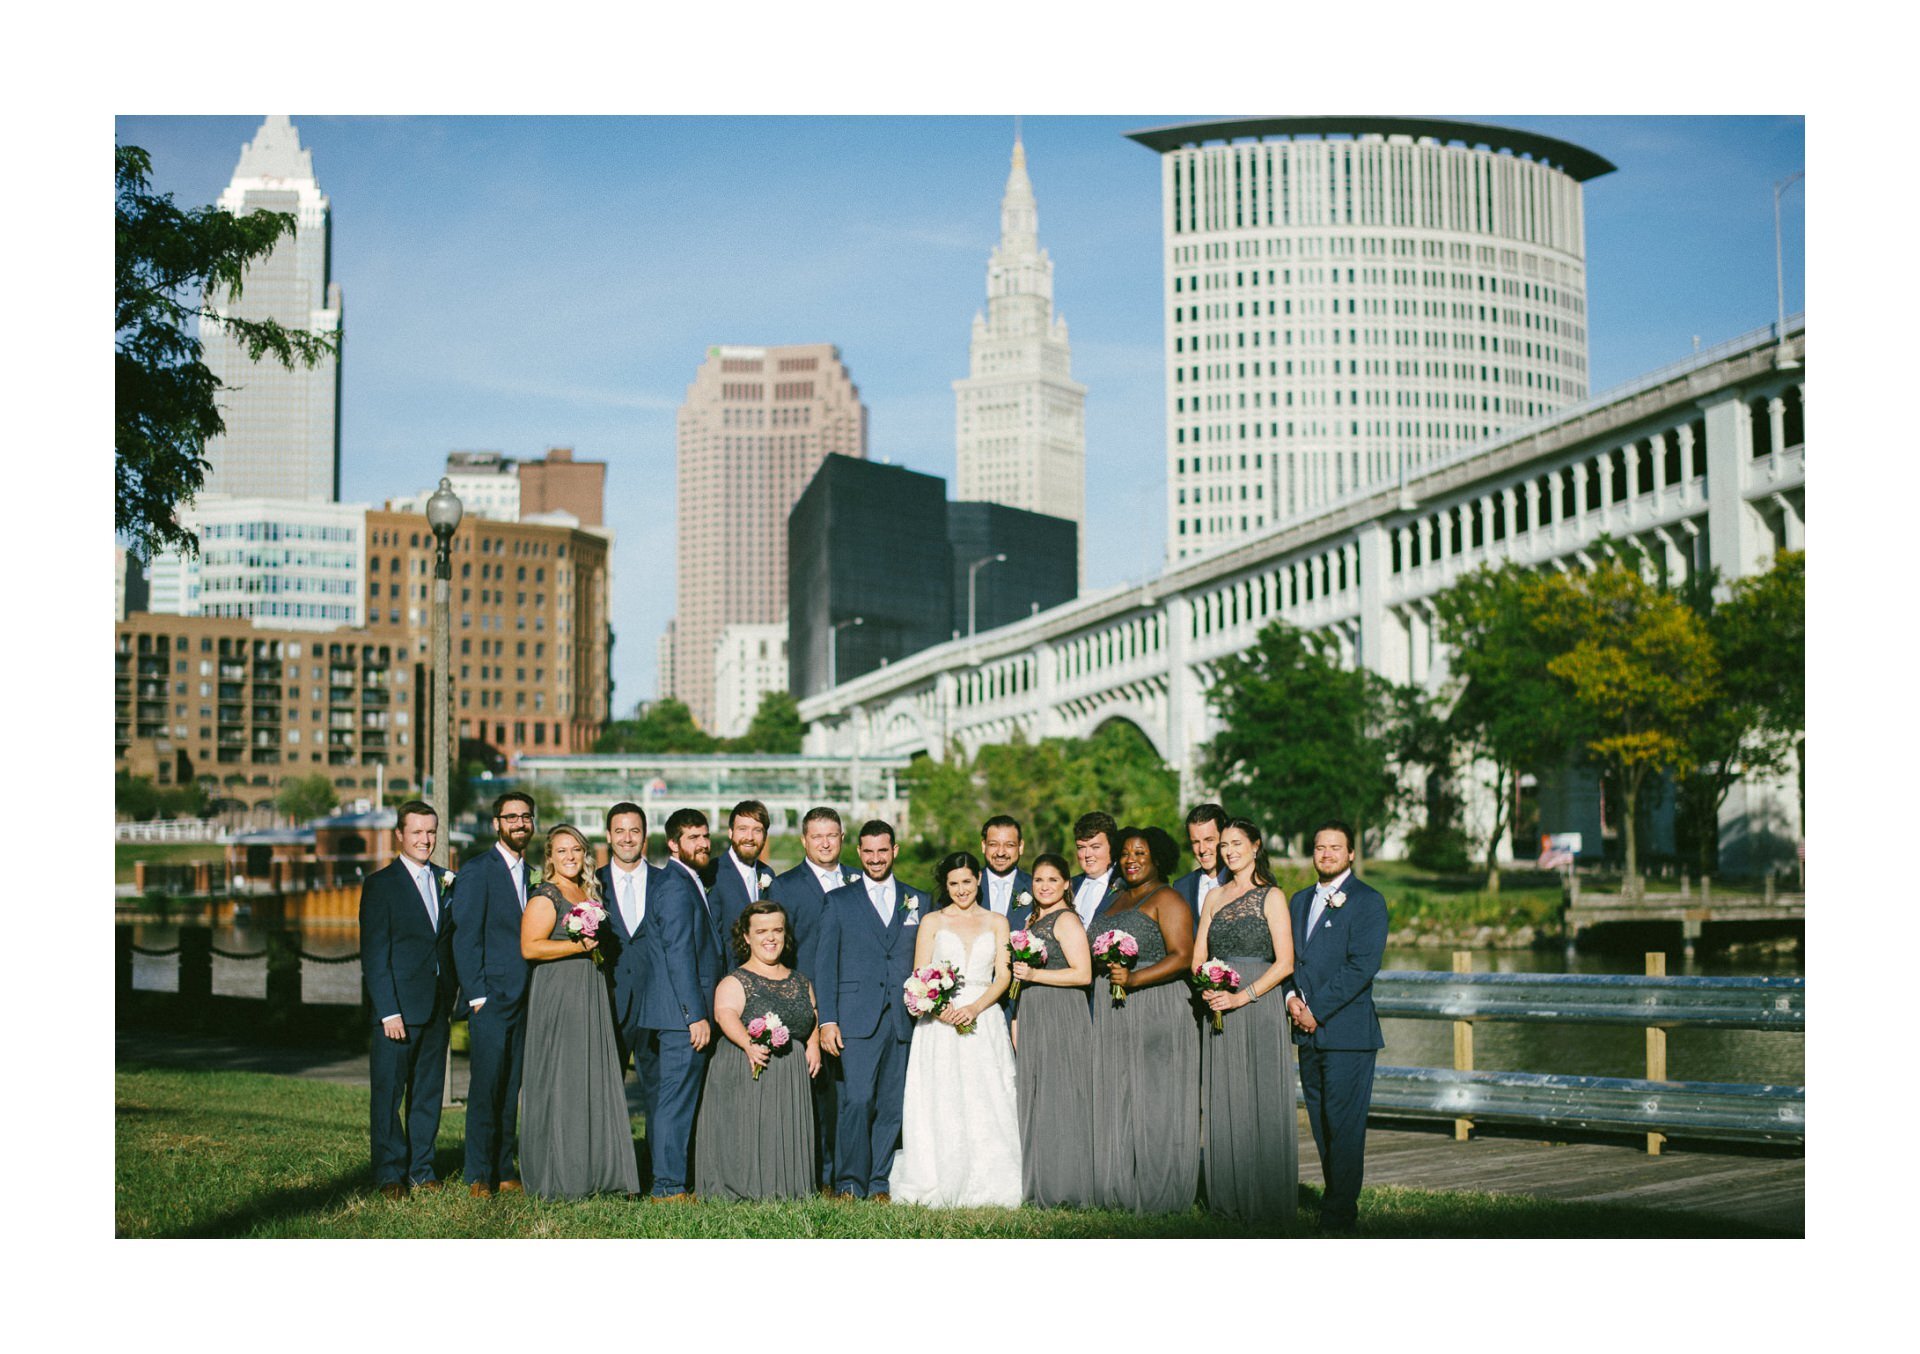 Crowne Plaza Hotel at Playhouse Square Wedding Photos in Cleveland 2 7.jpg